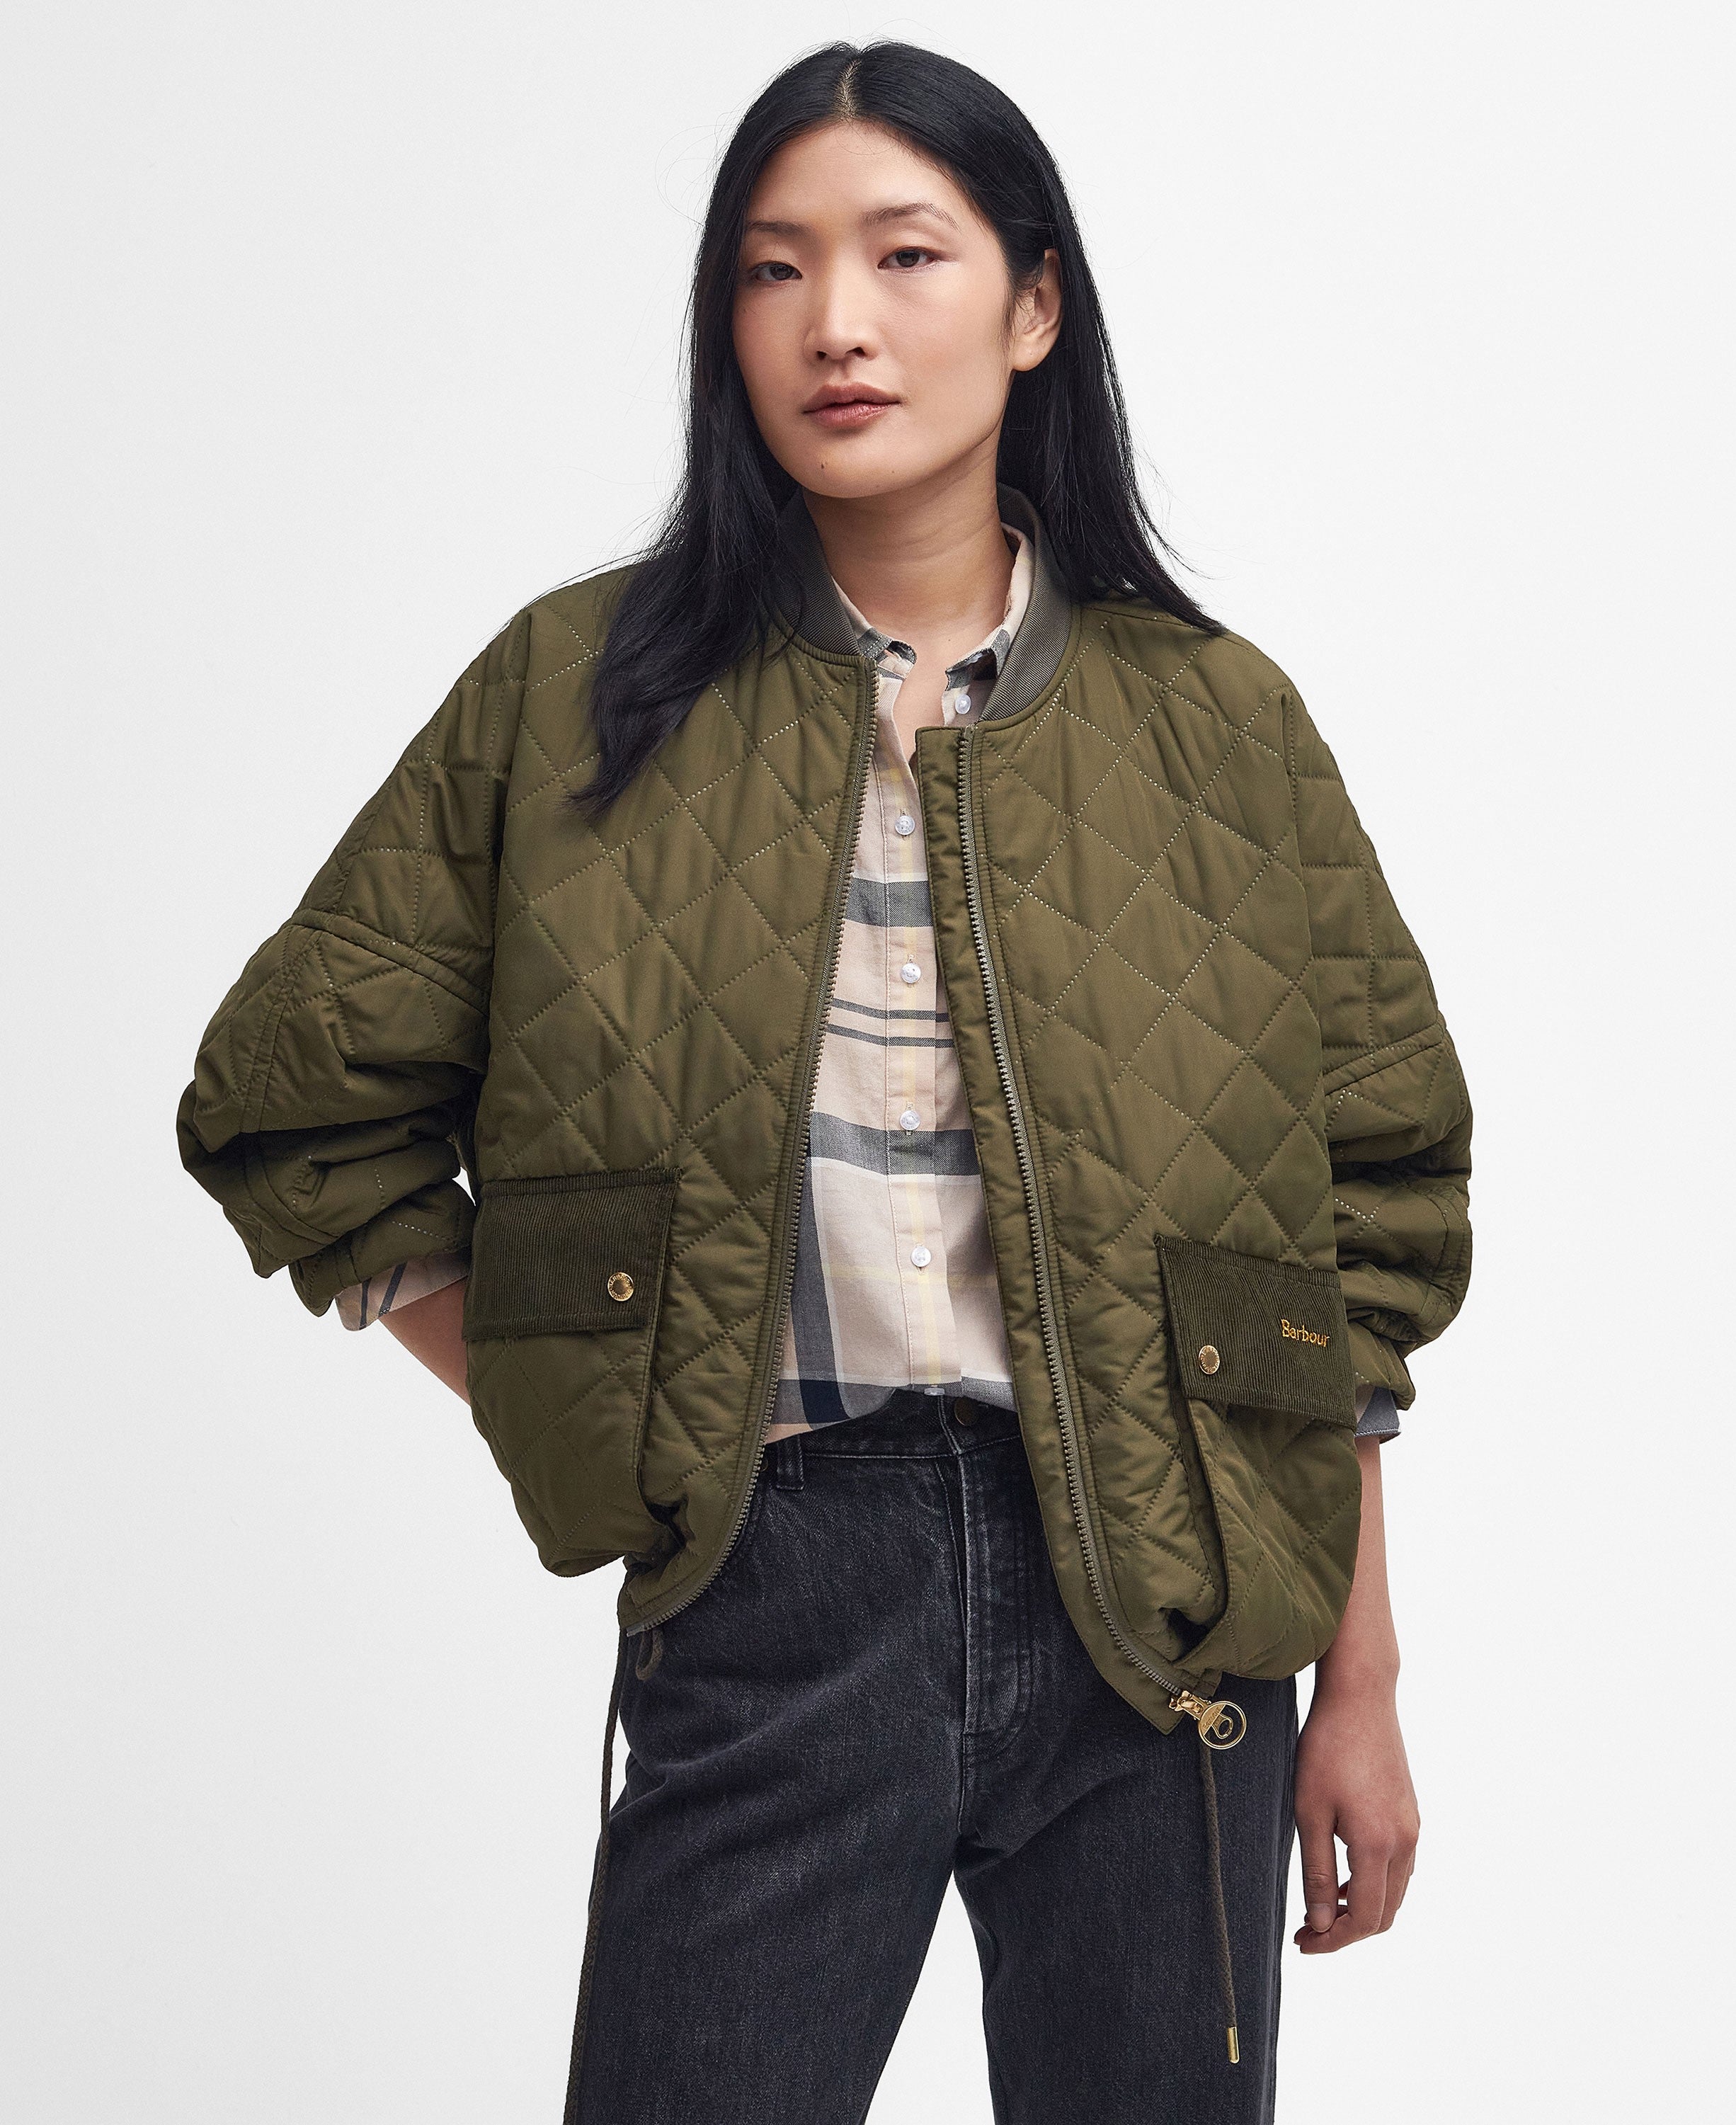 Bowhill Quilted Jacket - Army Green